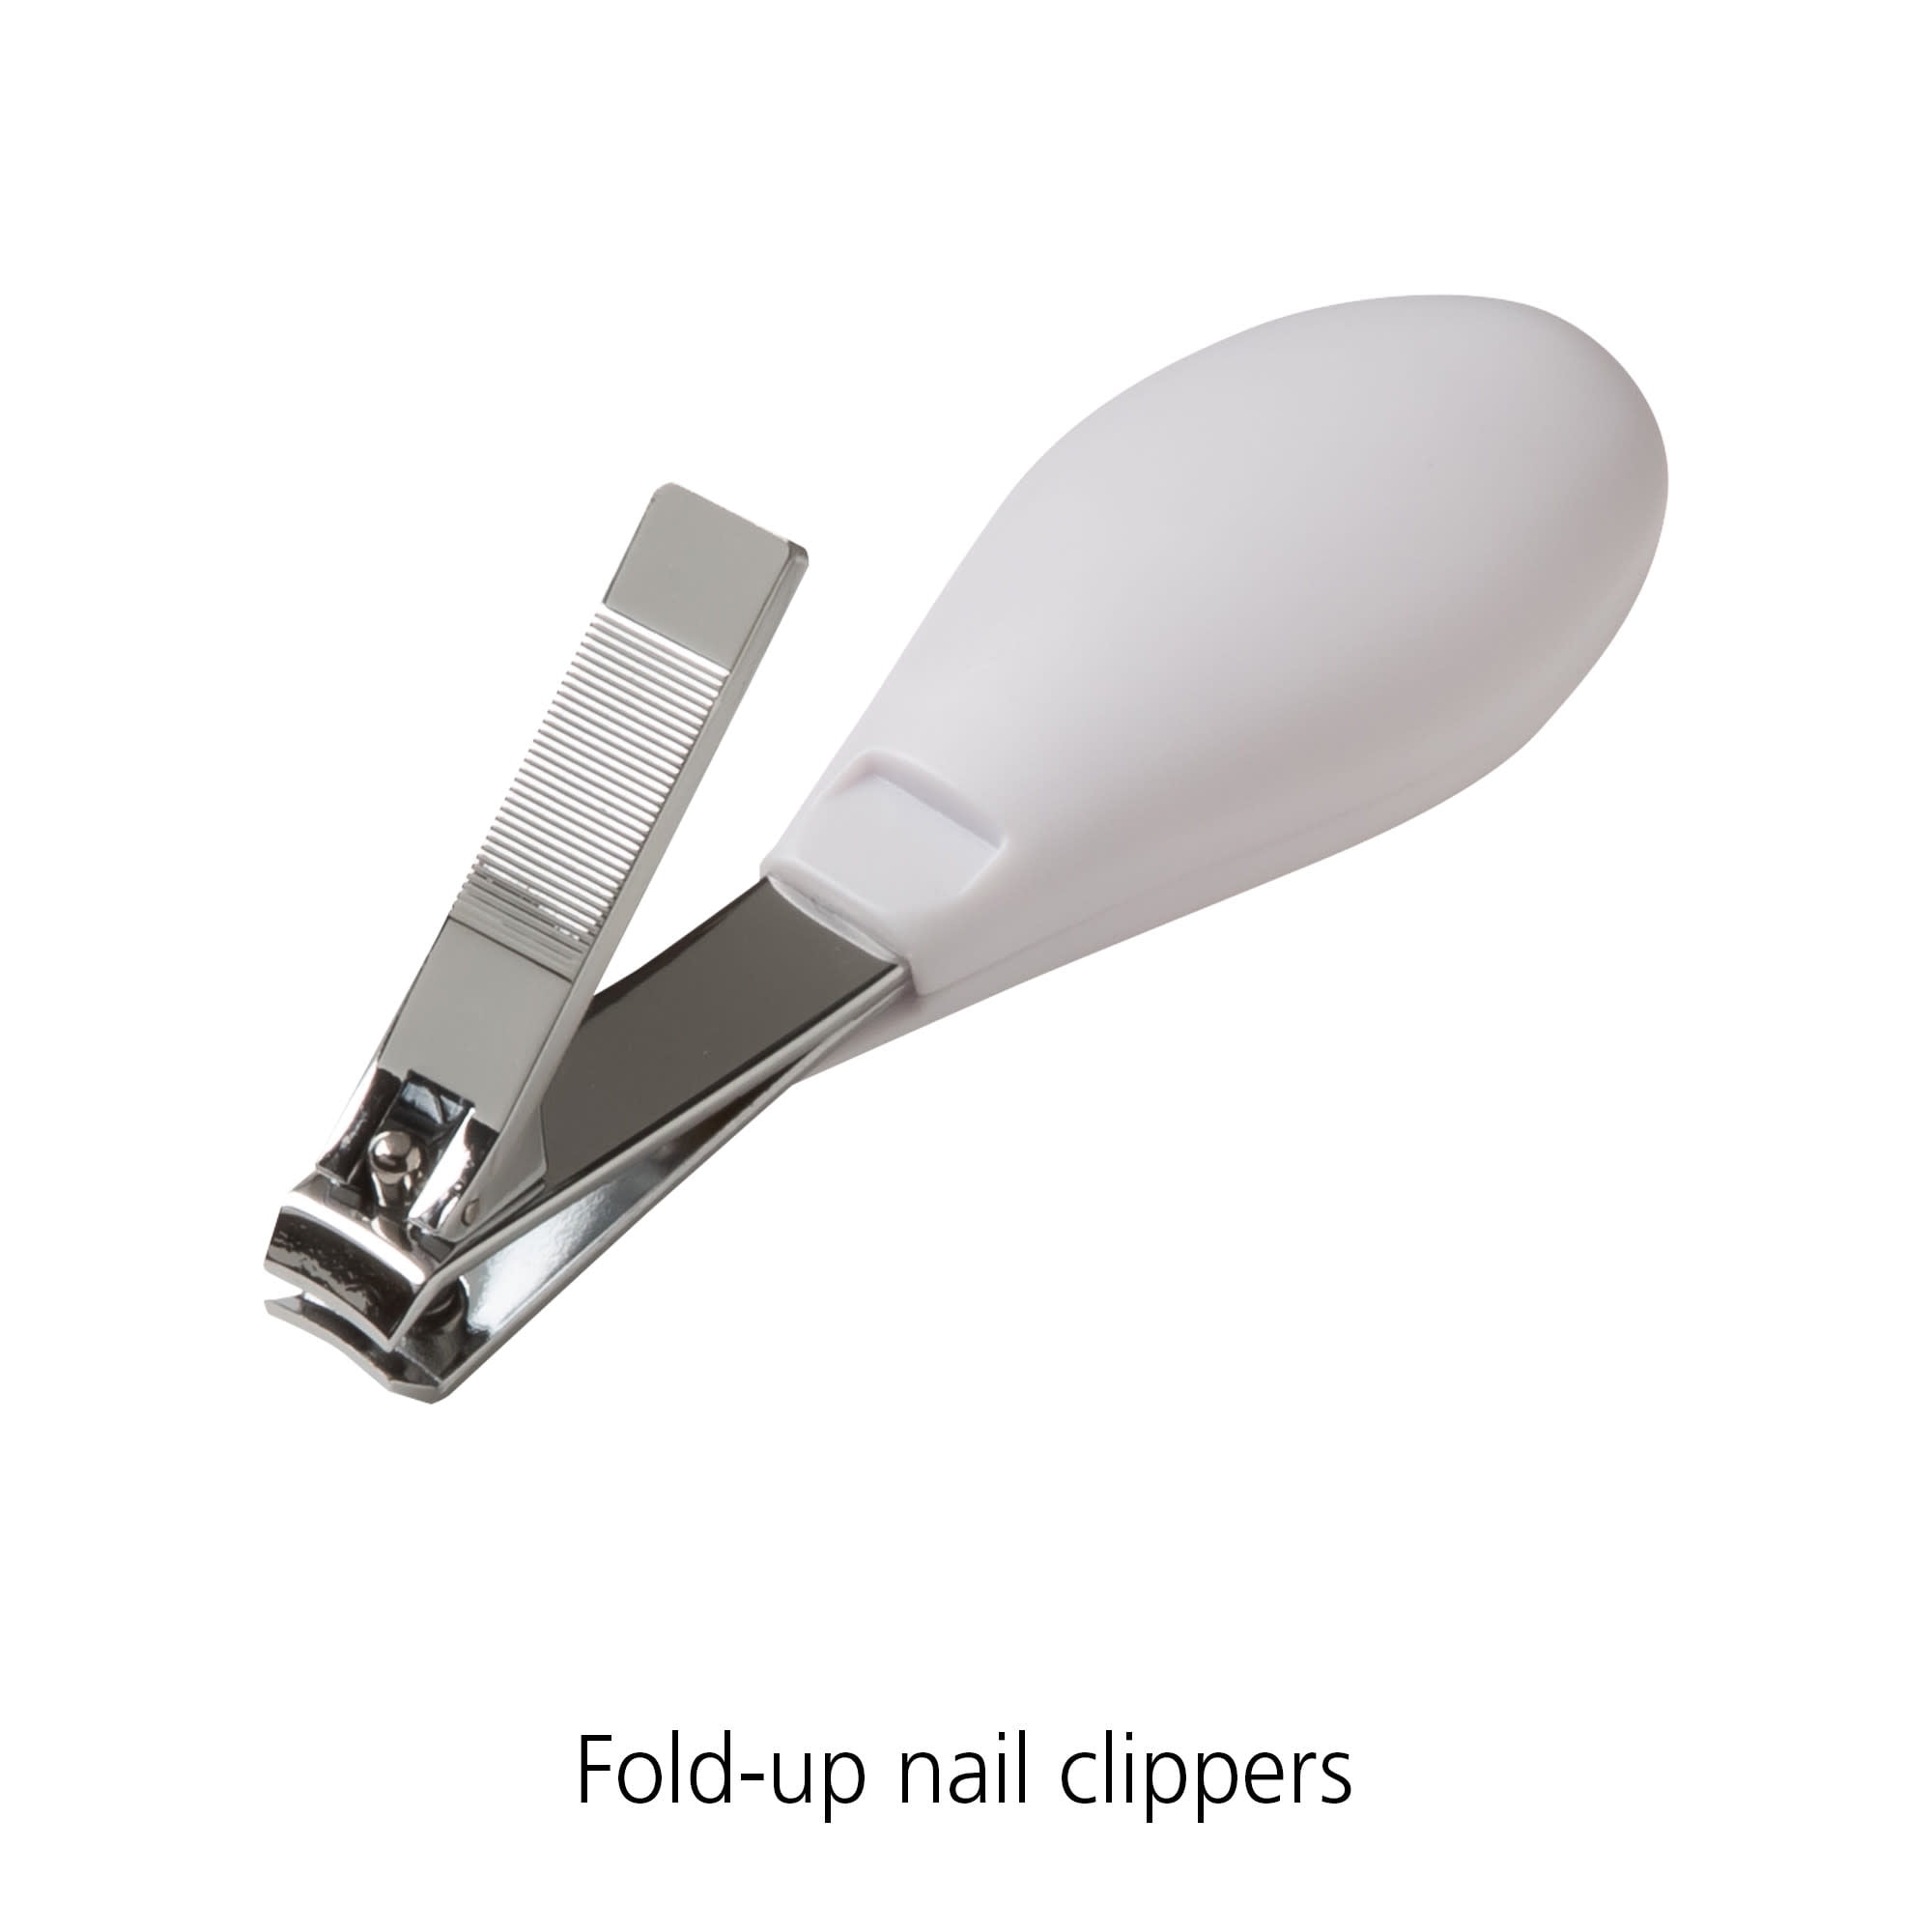 💡 Did you know? What a Nail Clipper has Safe Mode 